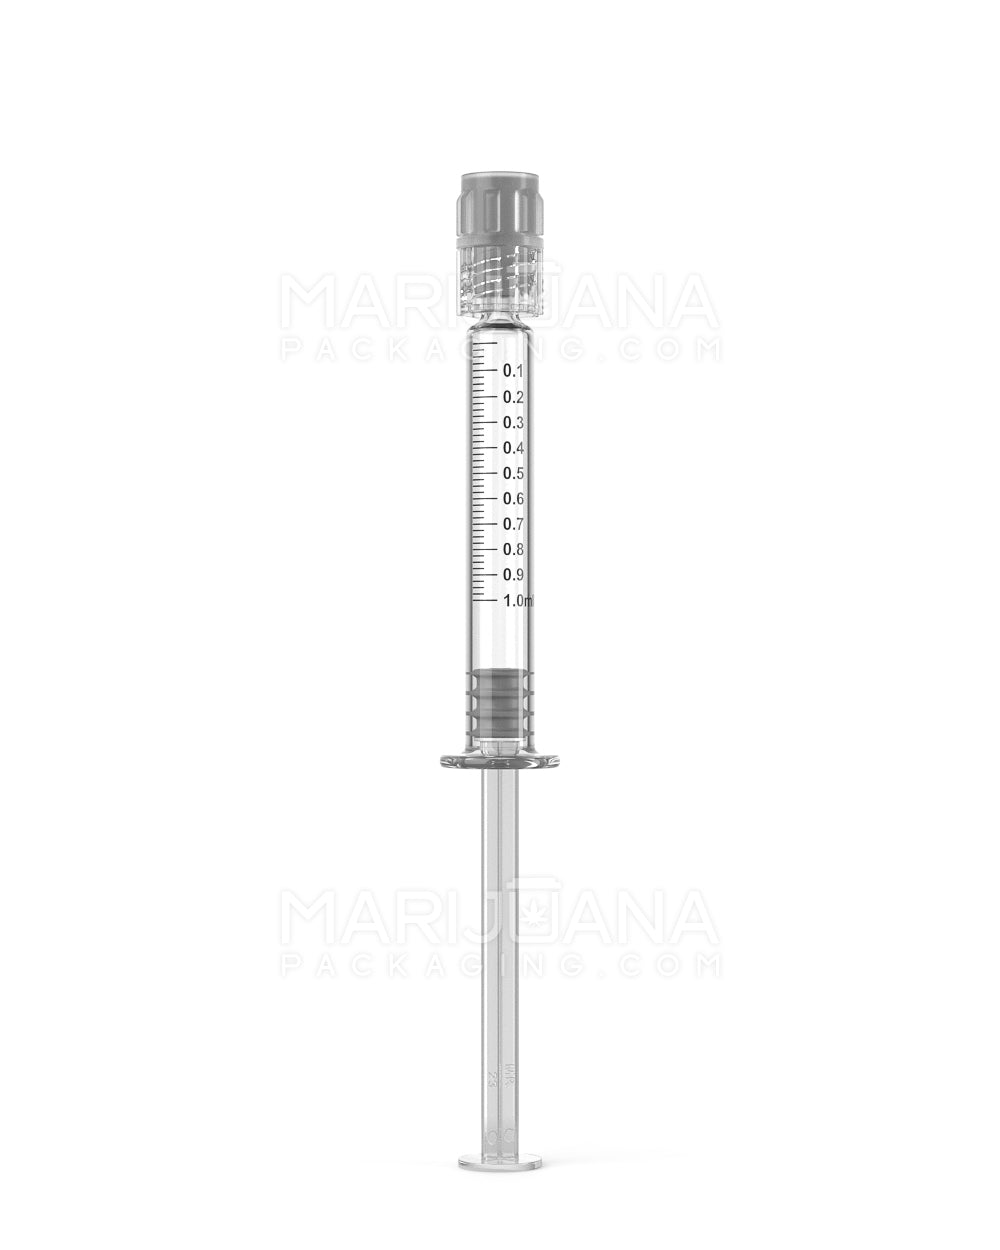 Luer Lock | Long Glass Dab Applicator Syringes | 1mL - 0.1mL Increments - 100 Count - 1